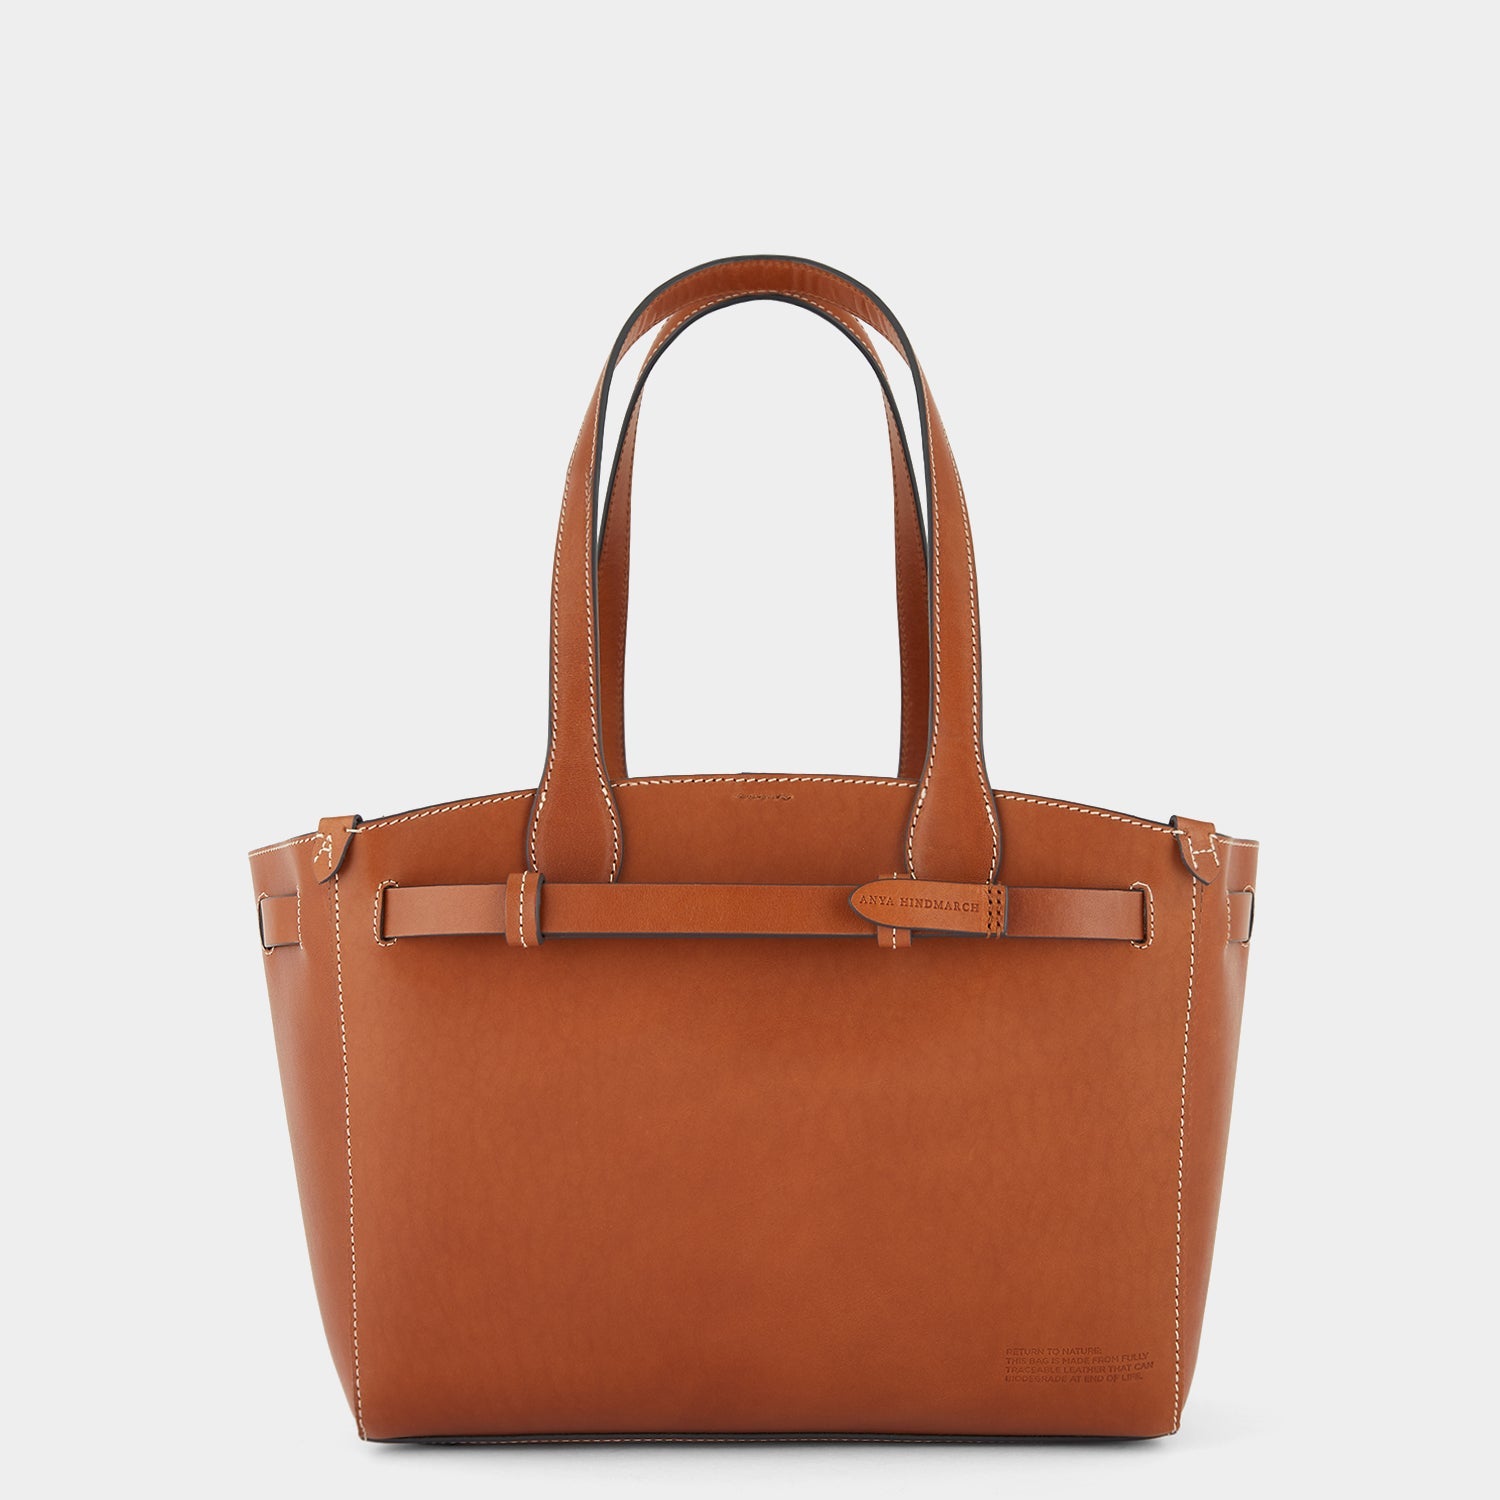 Return to Nature Tote Small -

                  
                    Compostable Leather in Tan -
                  

                  Anya Hindmarch US
